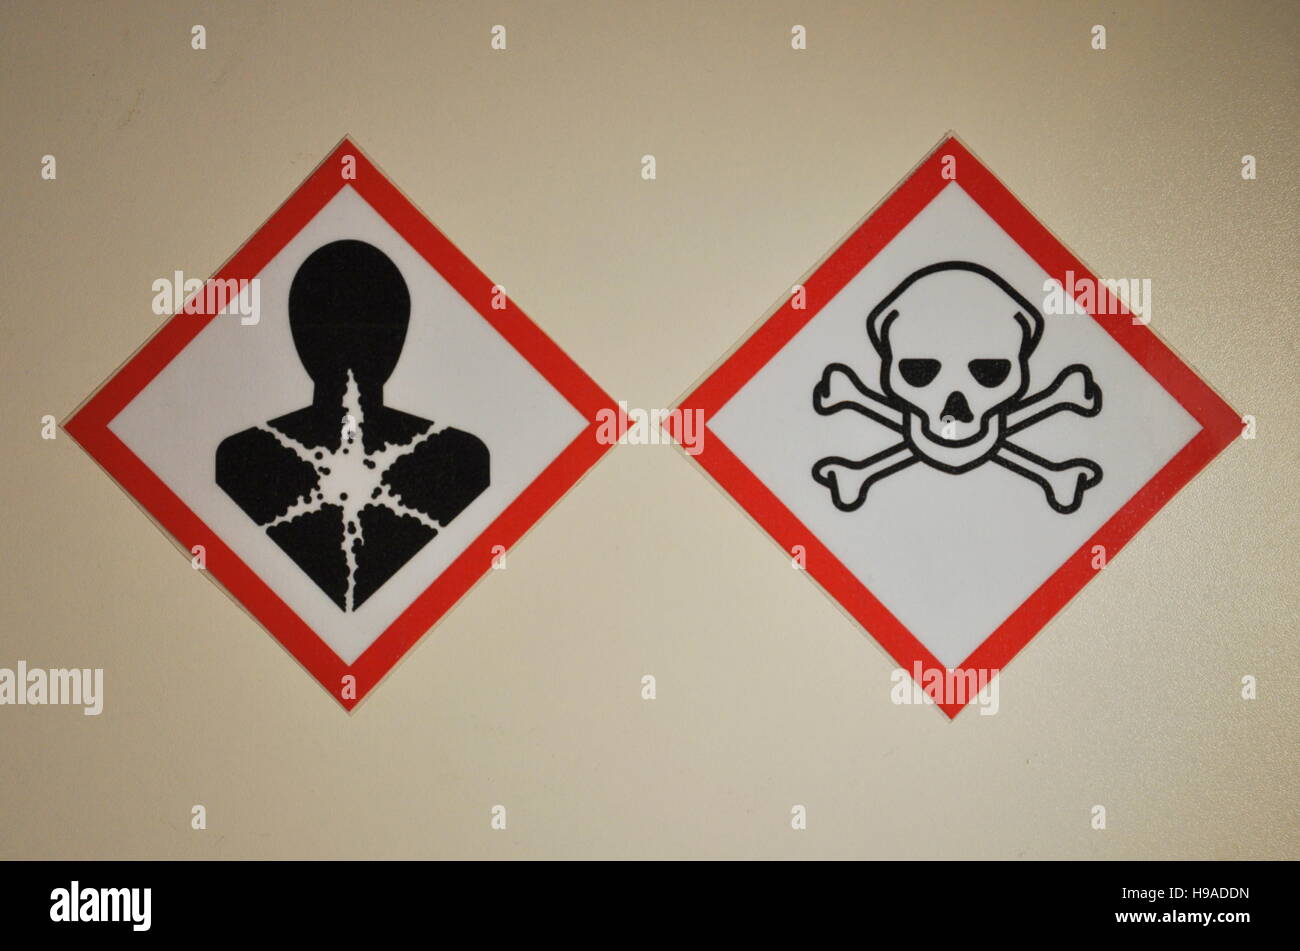 New labeling of hazardous substances, health, safety, protection, chemicals Stock Photo